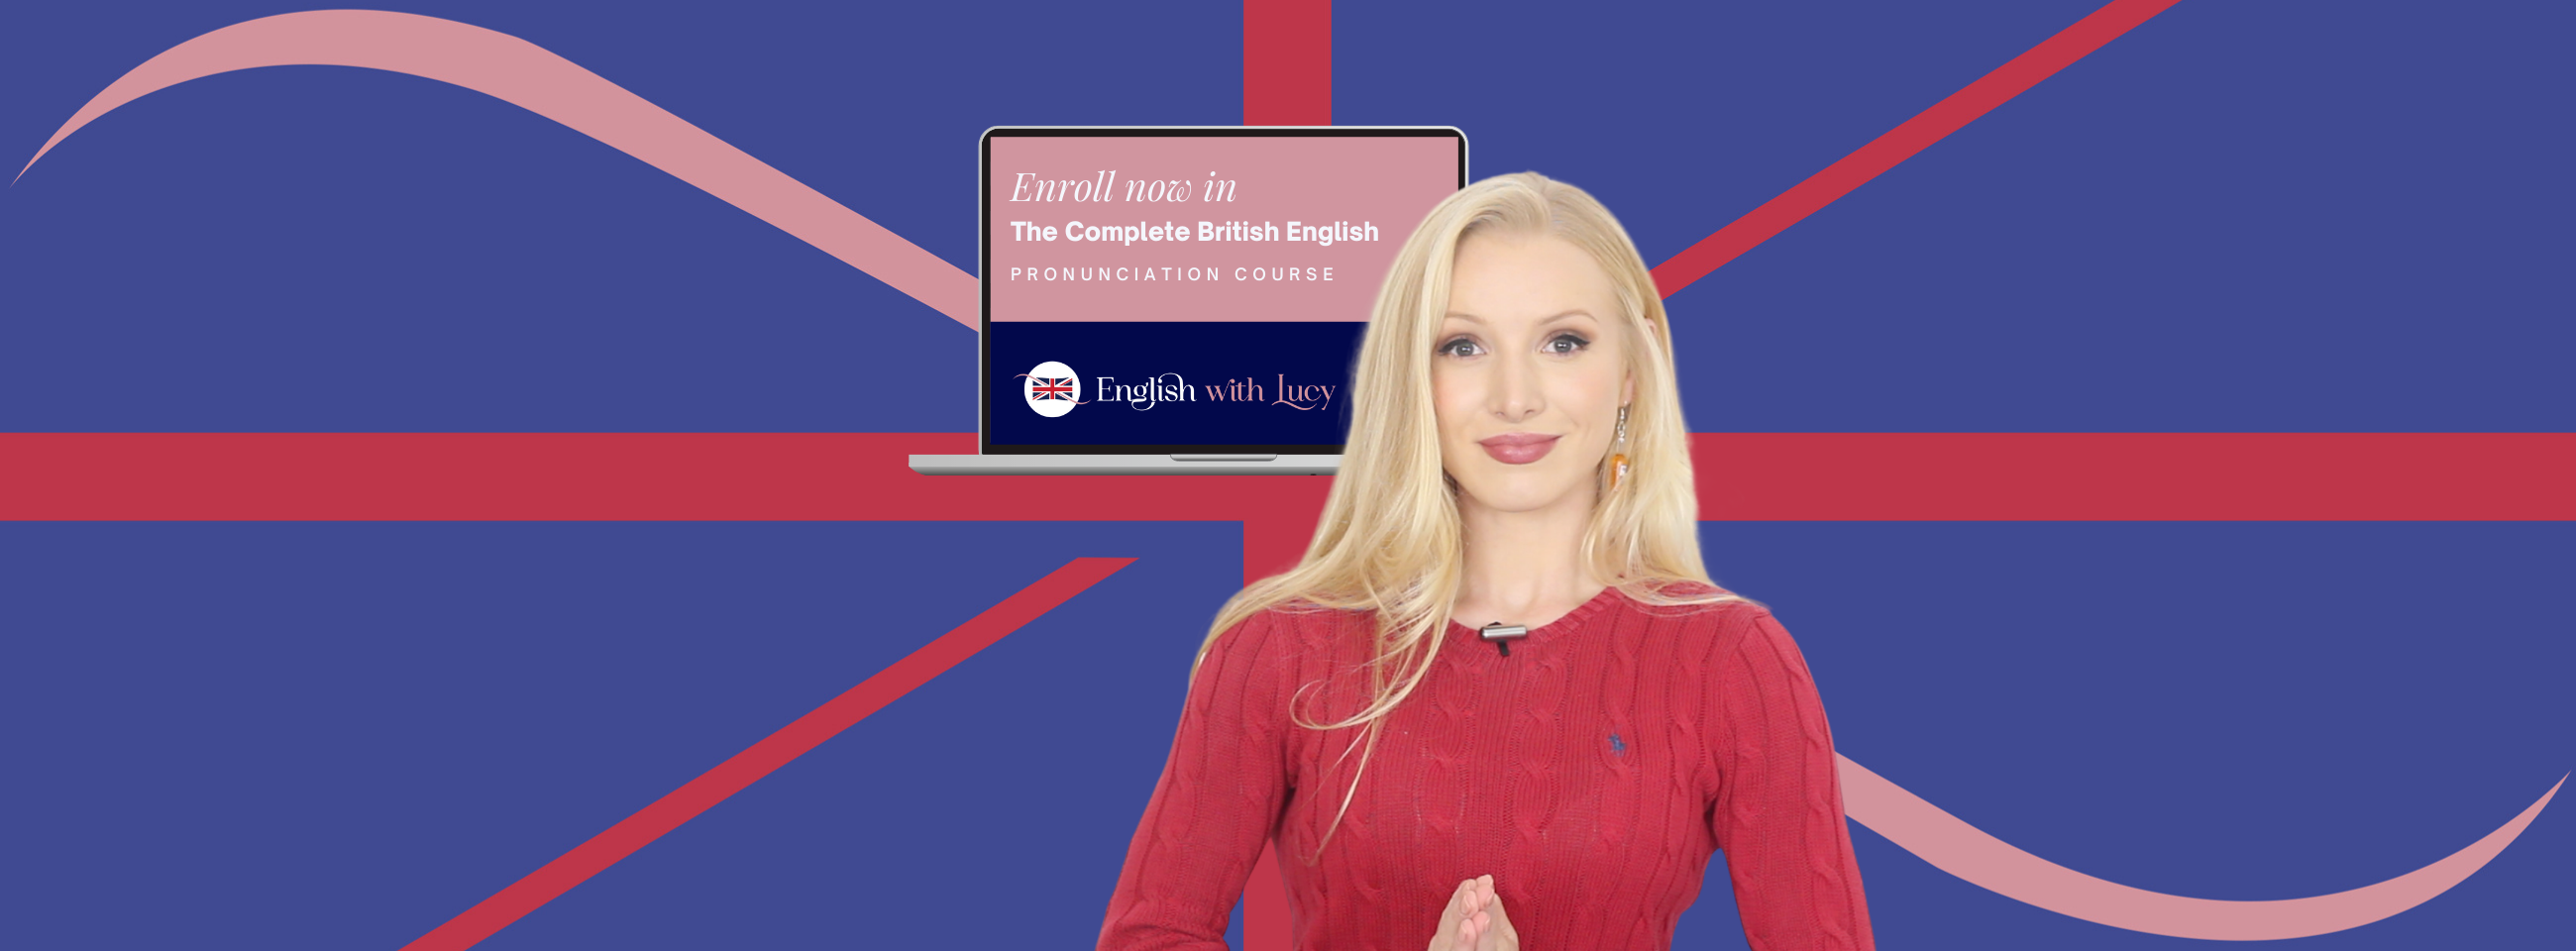 The British English Prononciation Course by English with Lucy